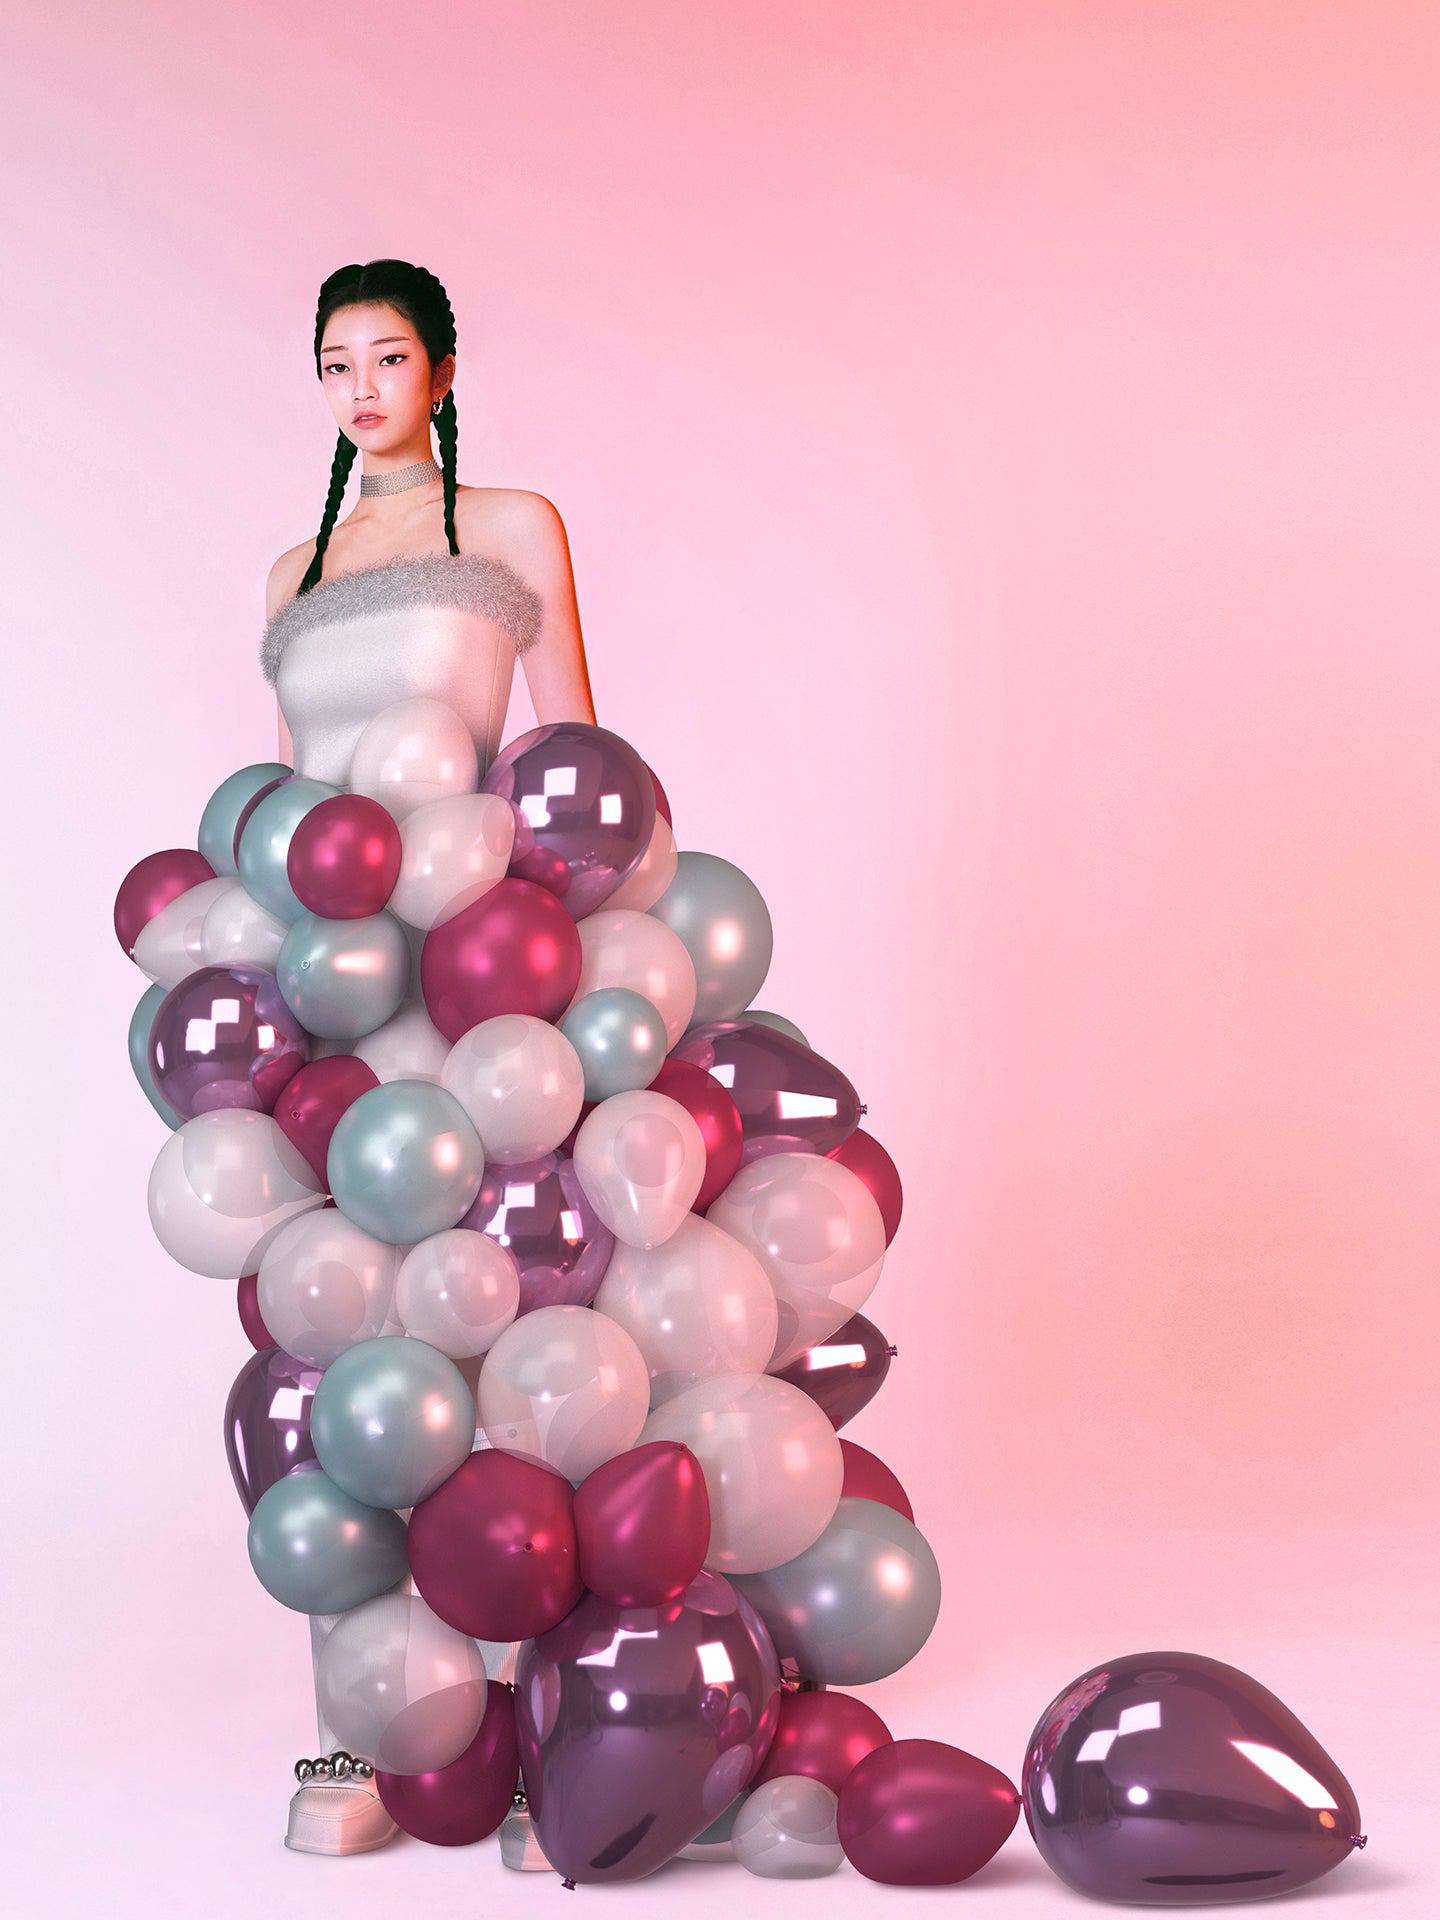 The Party Balloon Dress by OHROZY